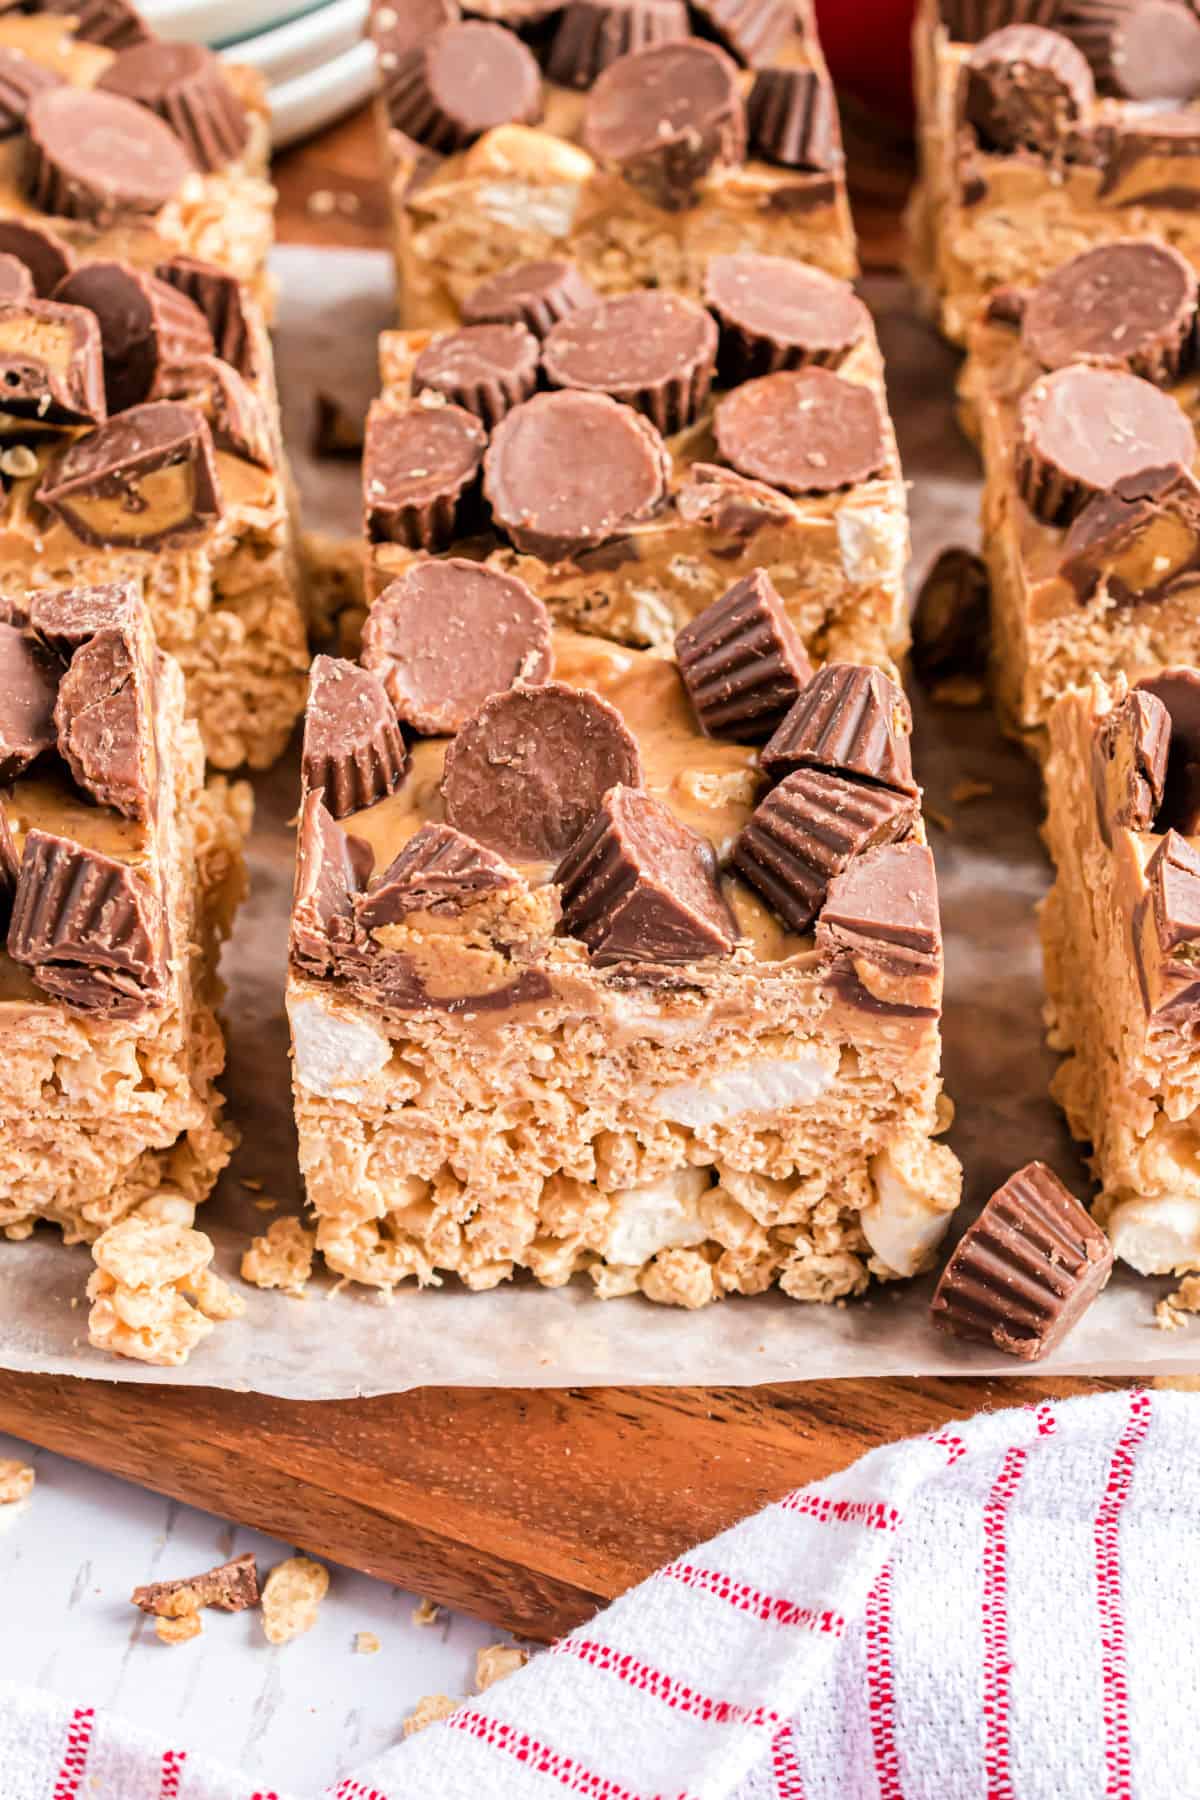 Peanut butter rice krispie treats topped with reese's peanut butter cups.